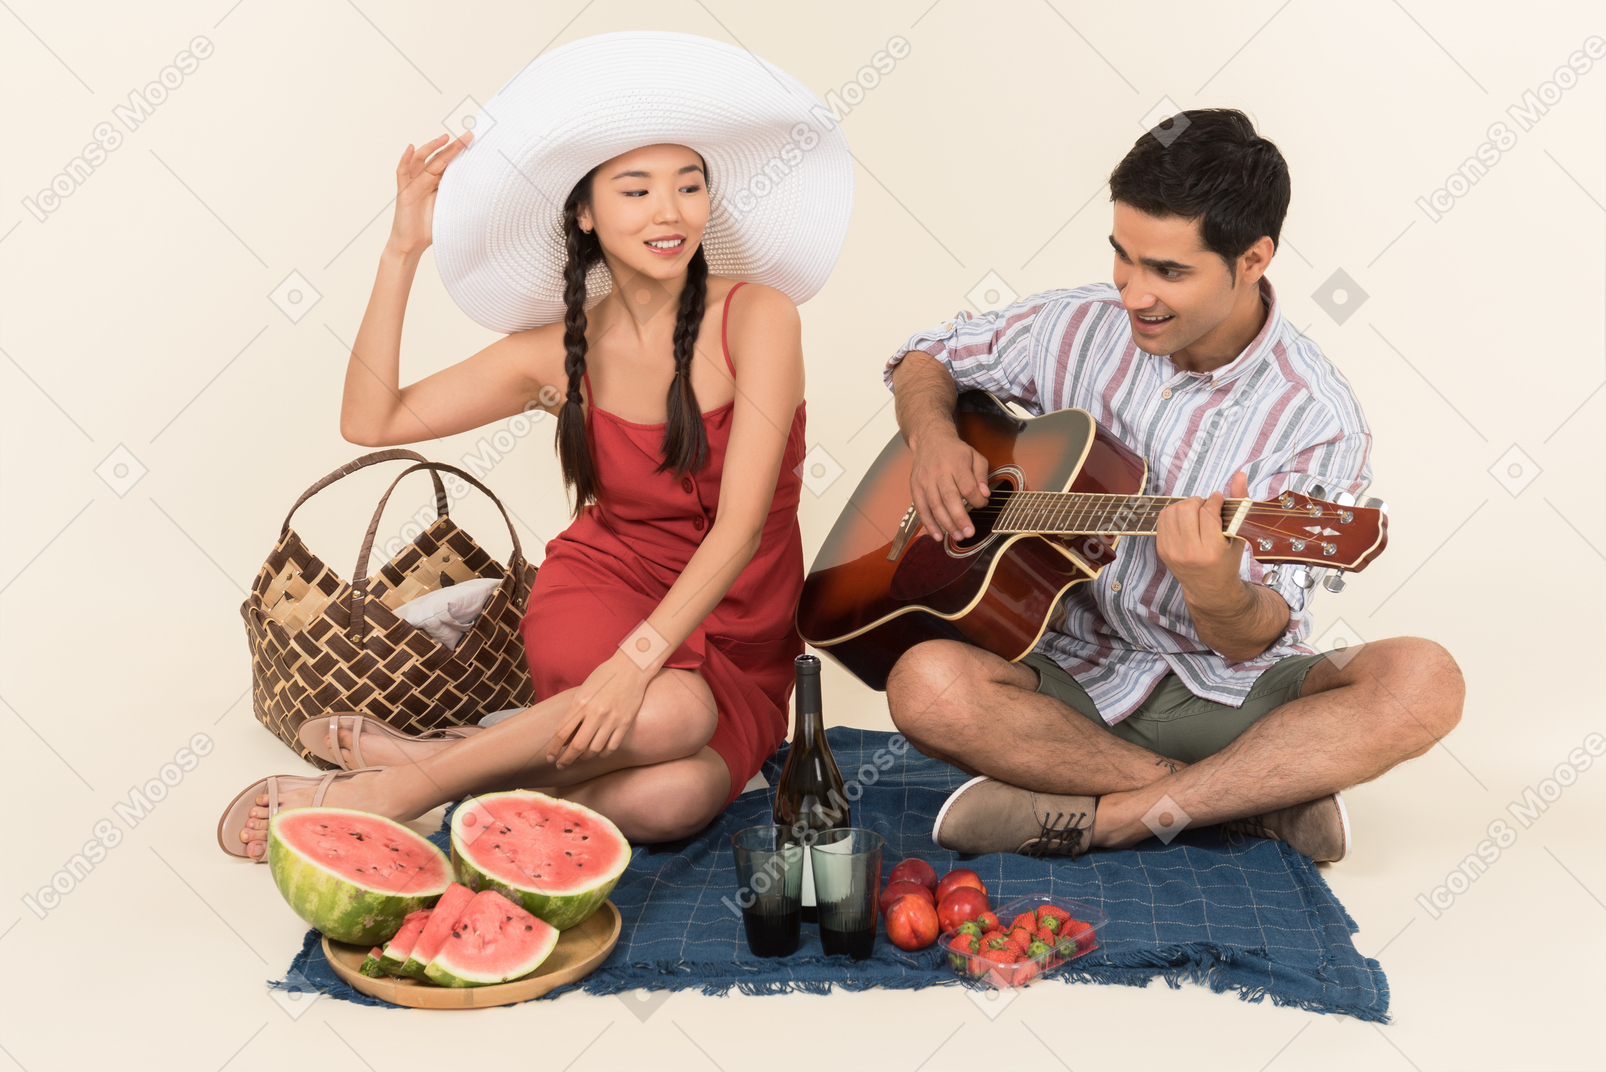 Interracial couple having picnic and man playing on guitar